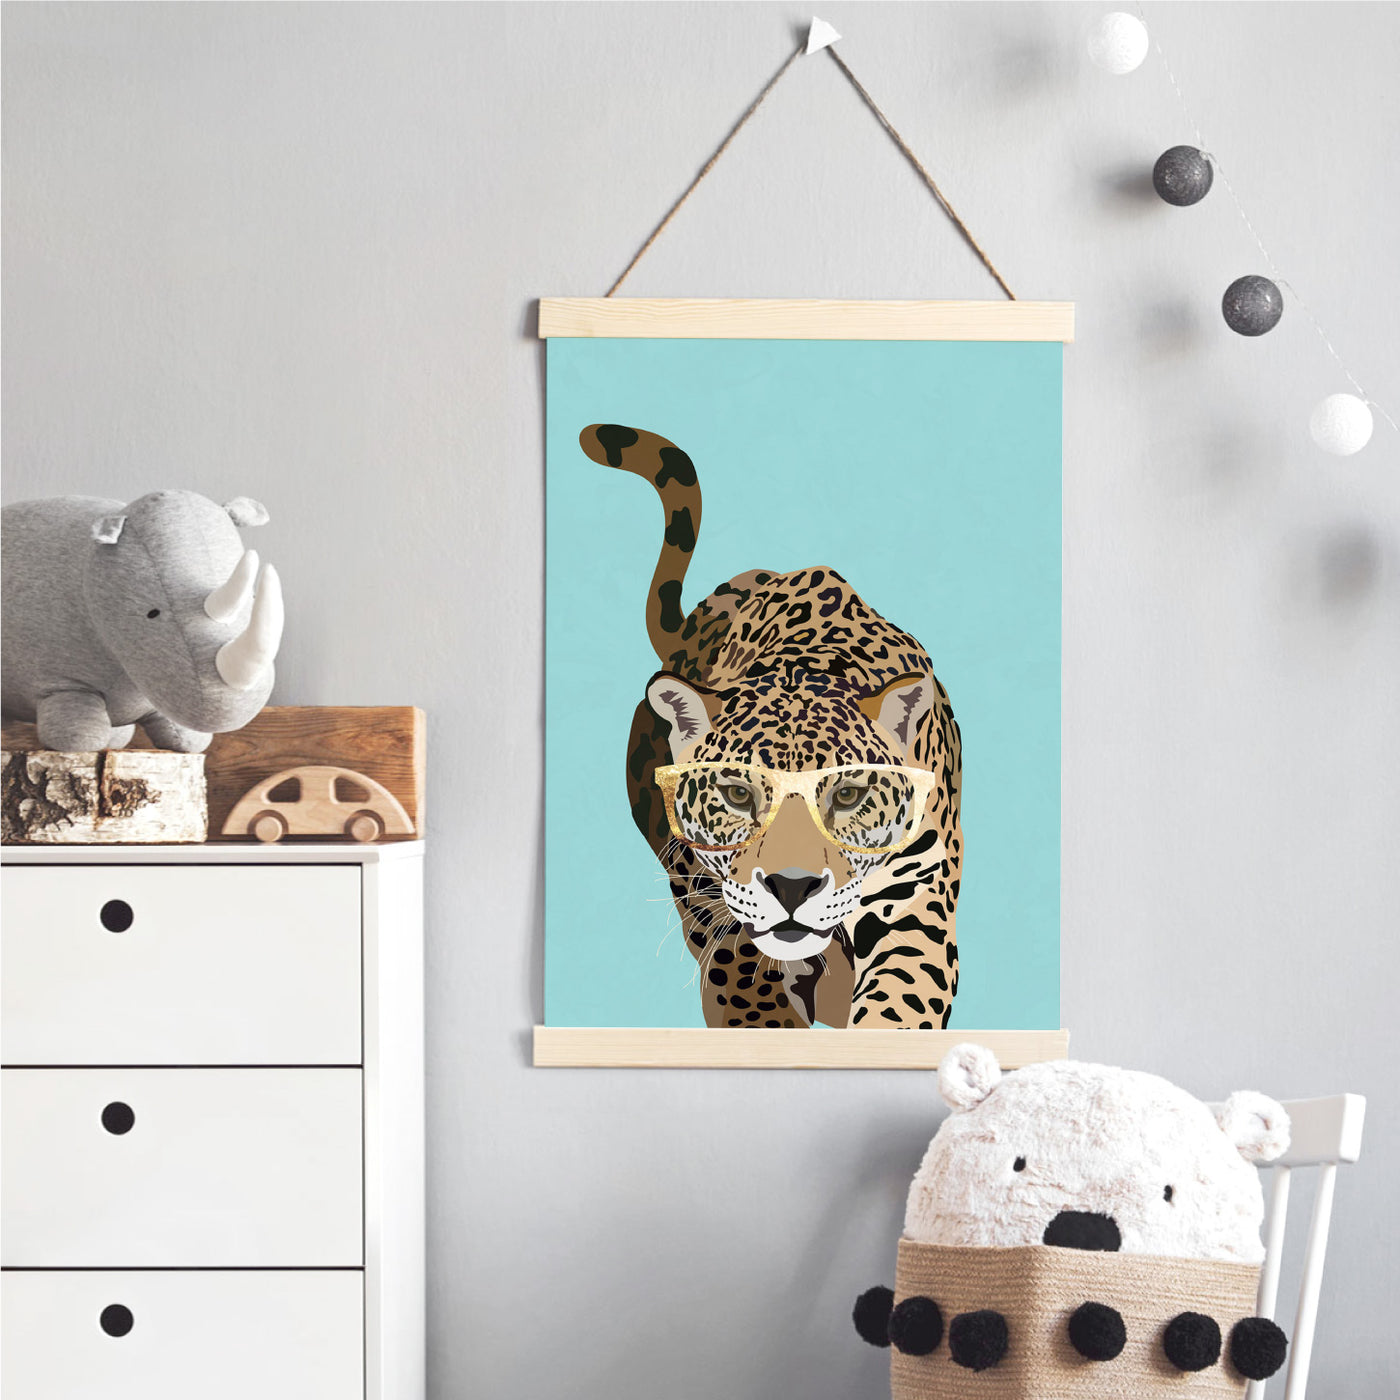 Leopard Pop - Art Print, Poster, Stretched Canvas or Framed Wall Art Prints, shown framed in a room